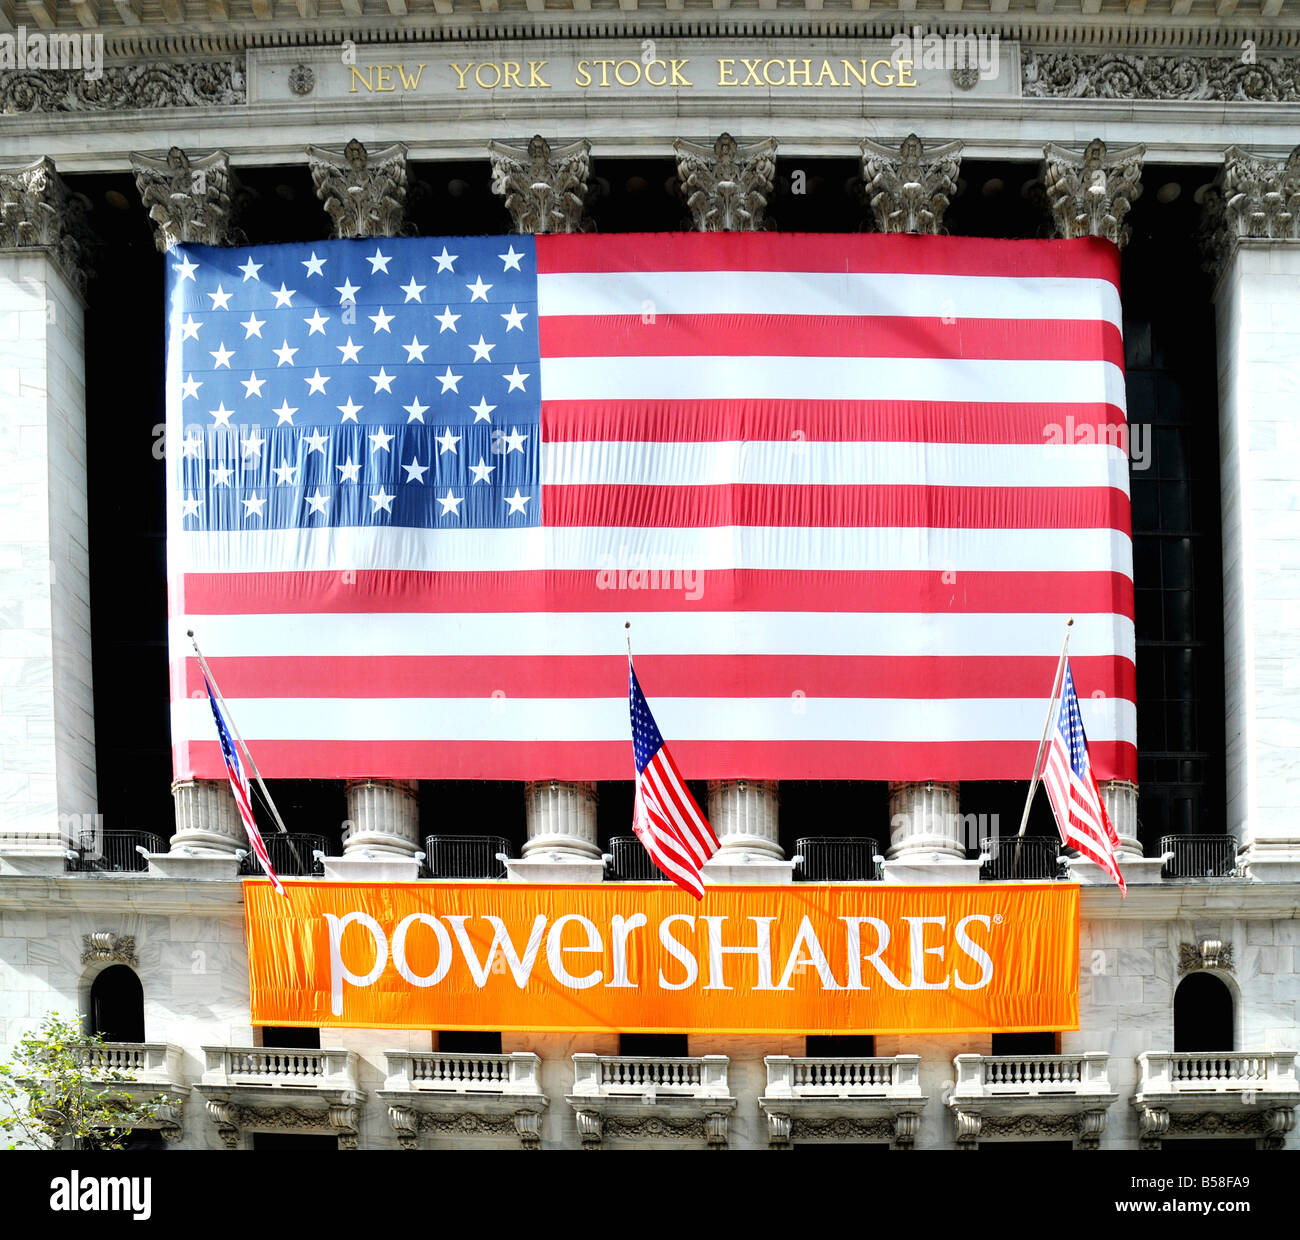 front of 'new york' 'stock exchange' 'wall street' and nasau st nyc ny america advertising power shares Stock Photo